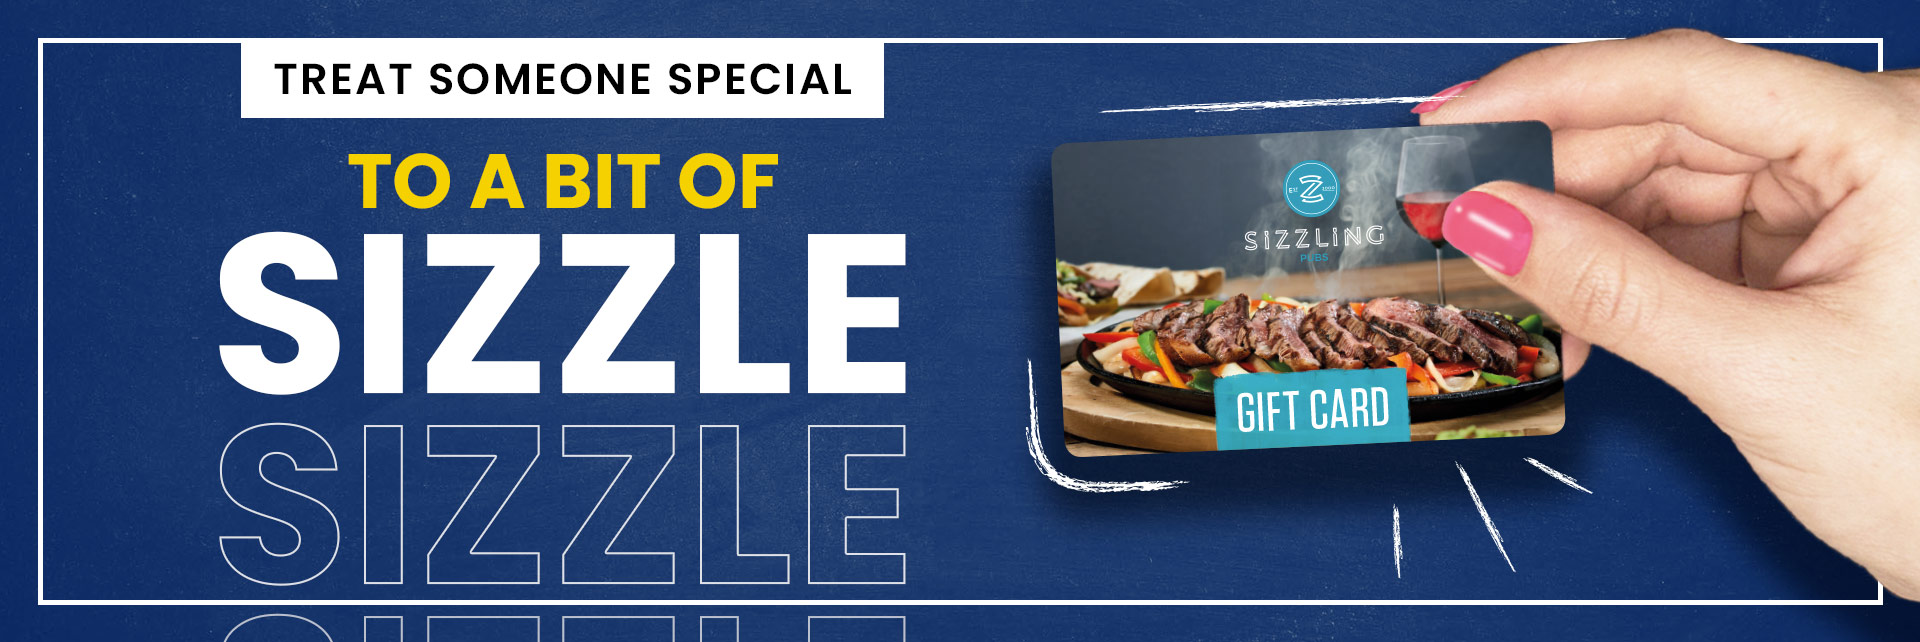 Sizzling Pubs Gift Card at Cherry Tree in Warrington